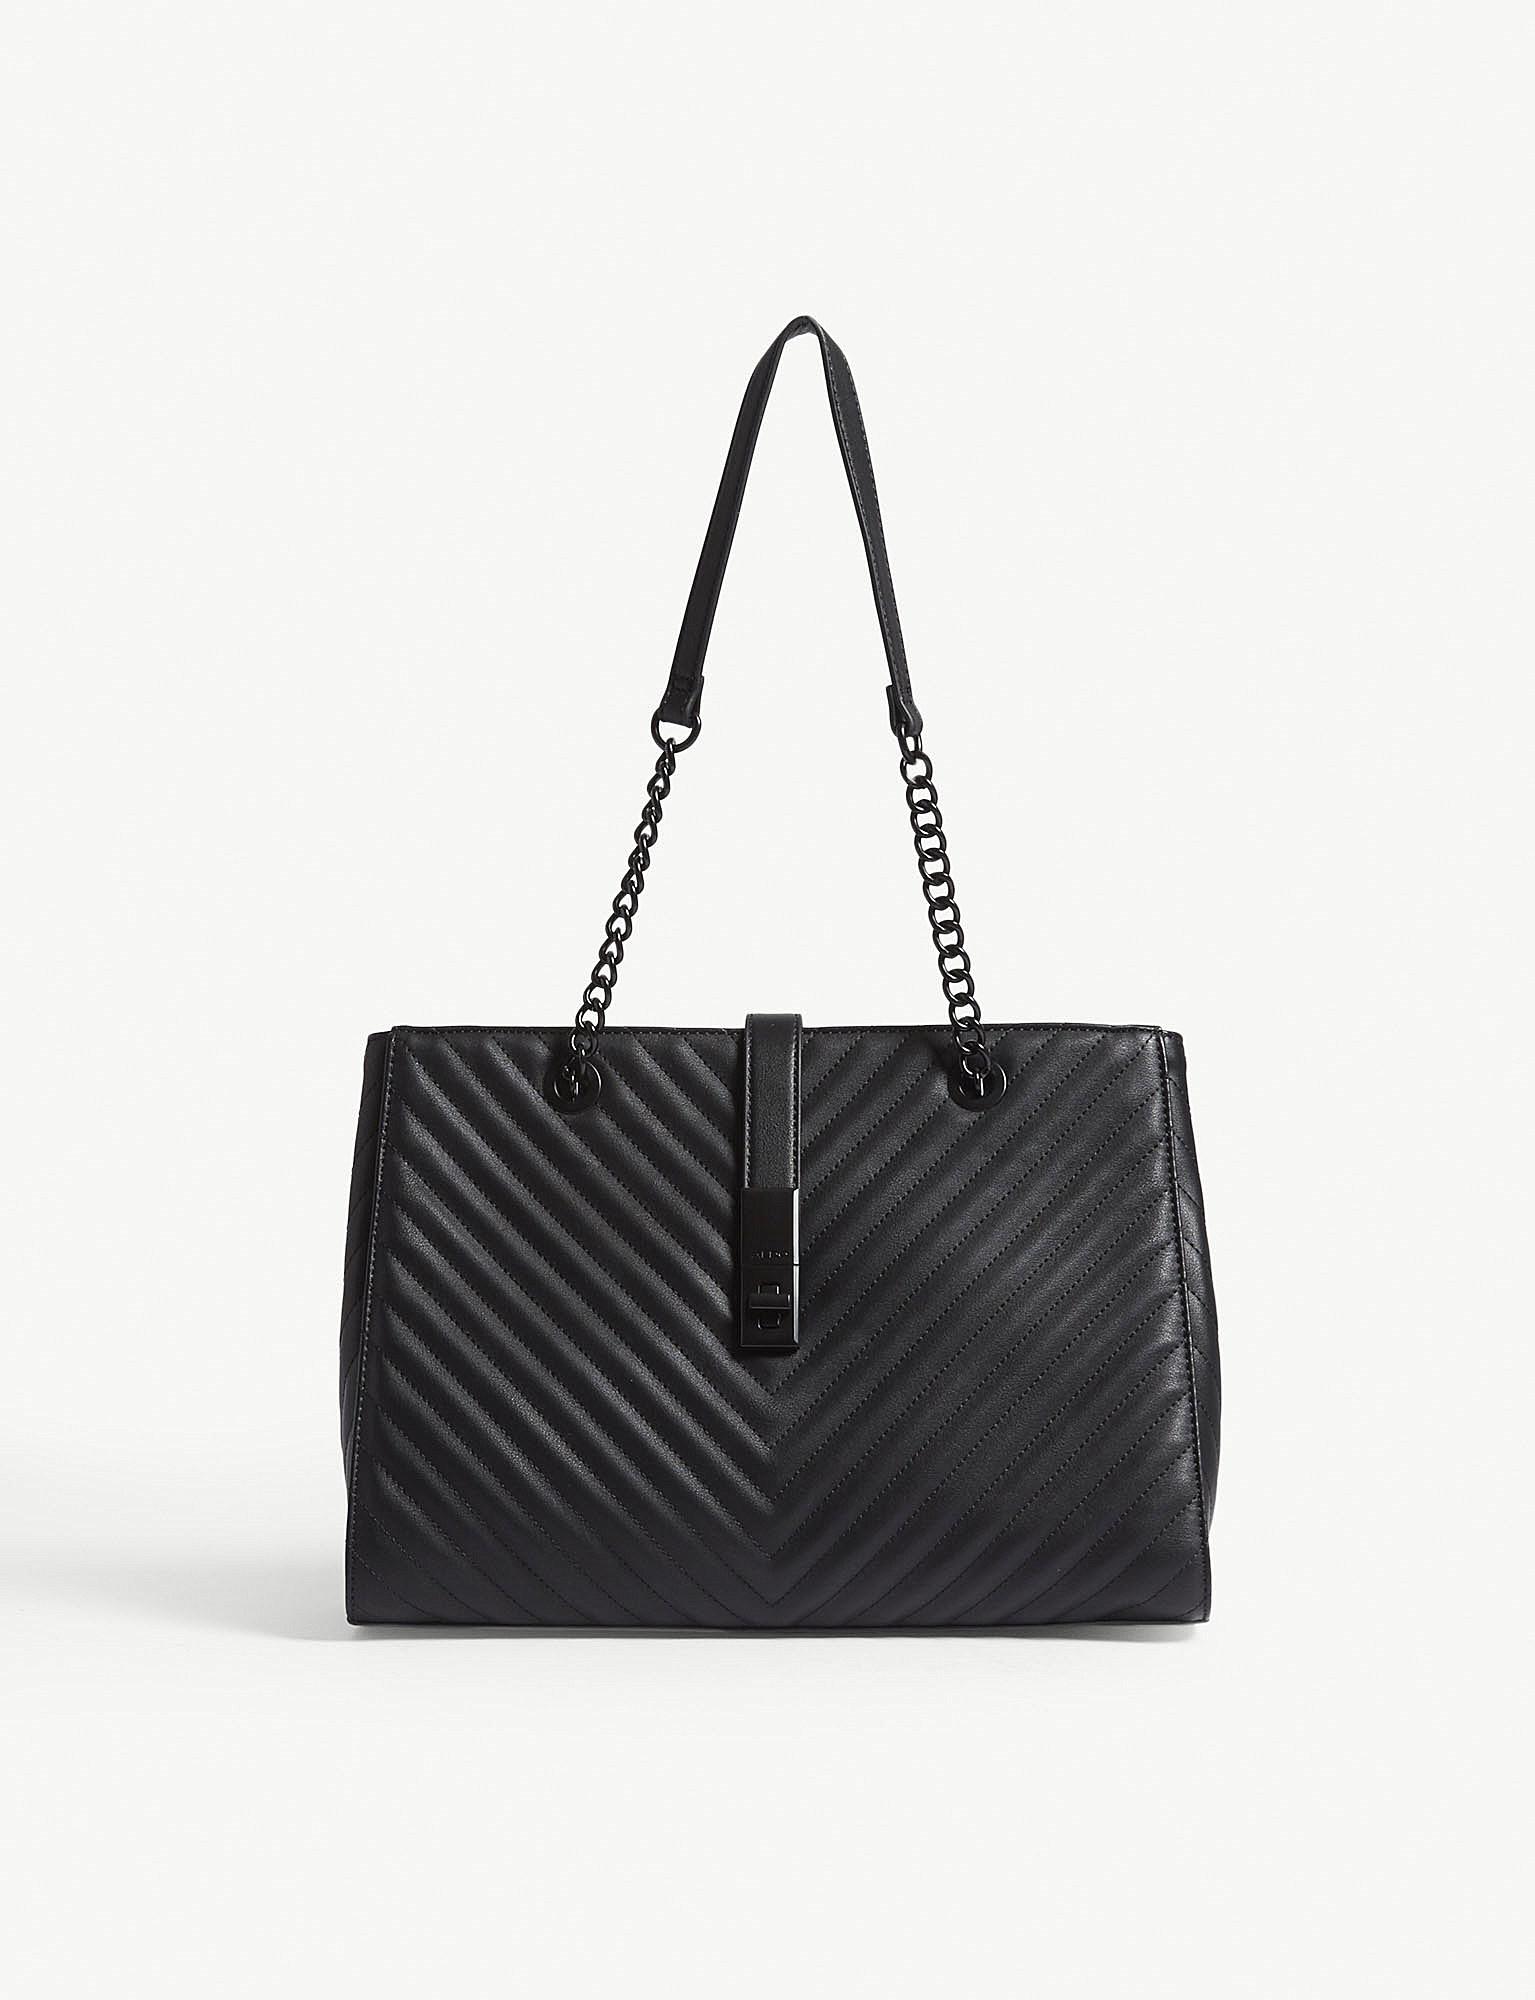 ALDO Black And Velvet Oxdrift Chevron Quilted Faux-leather Tote Bag - Lyst